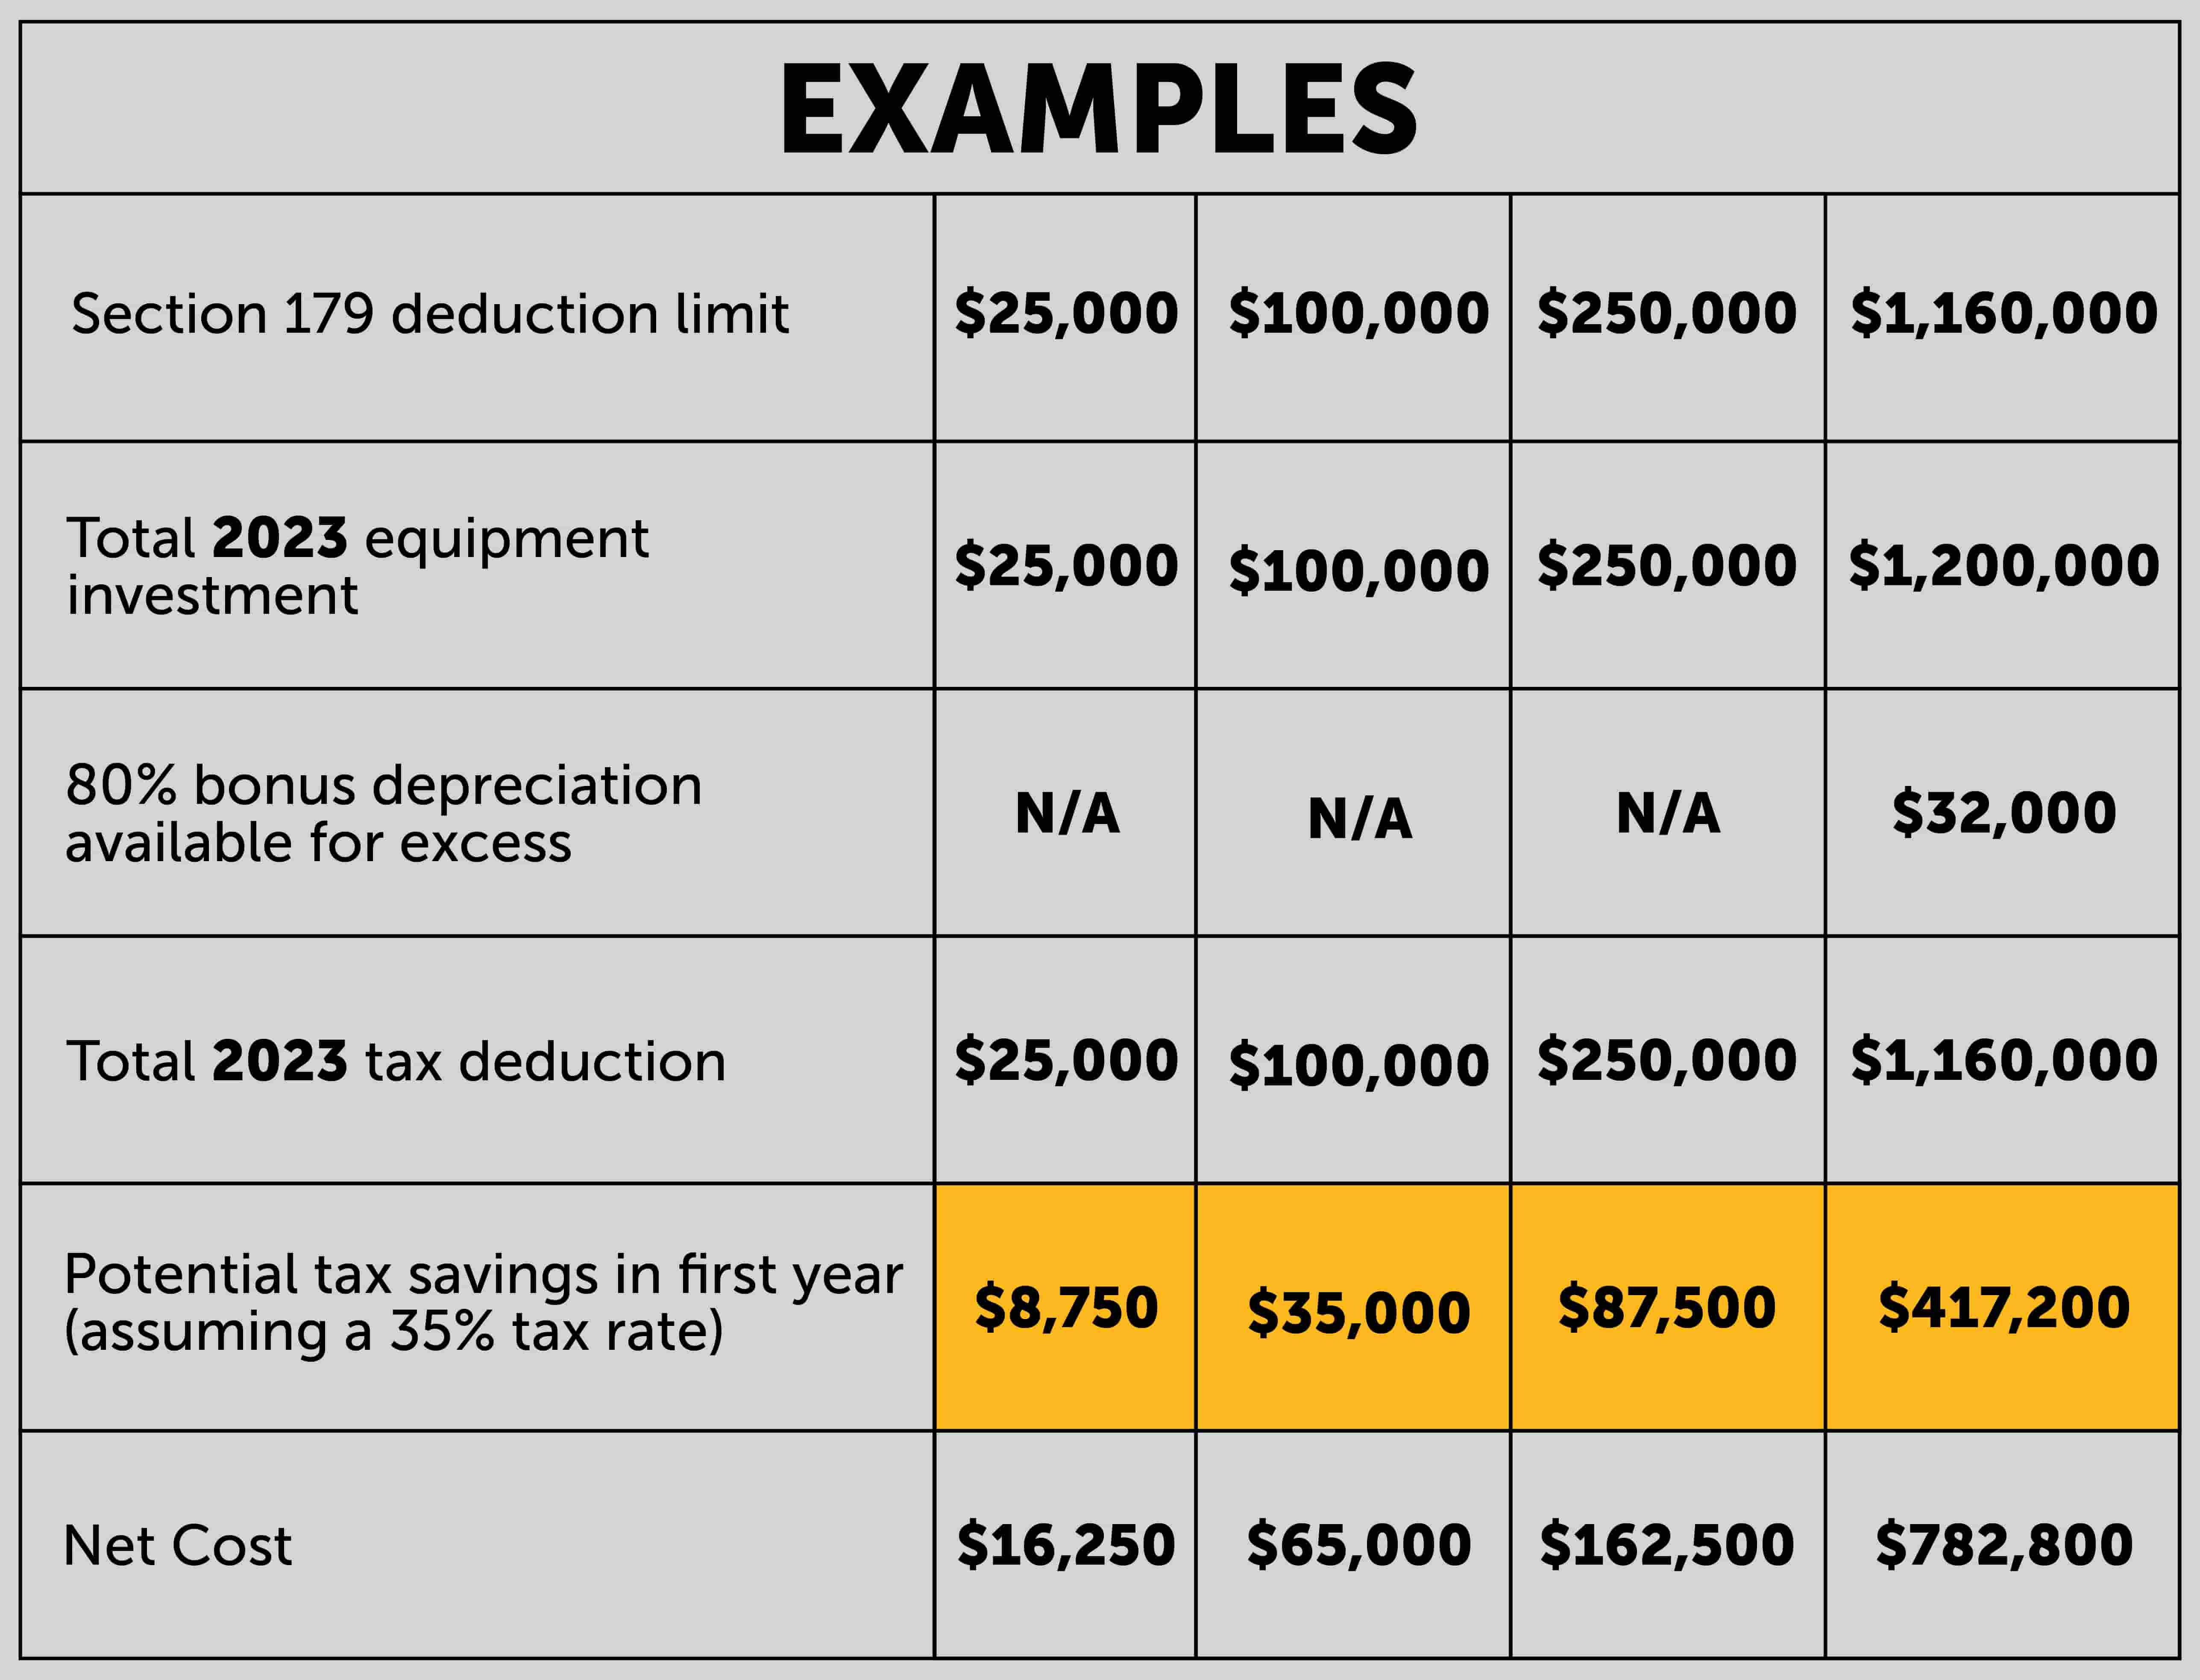 Section 179 savings example table